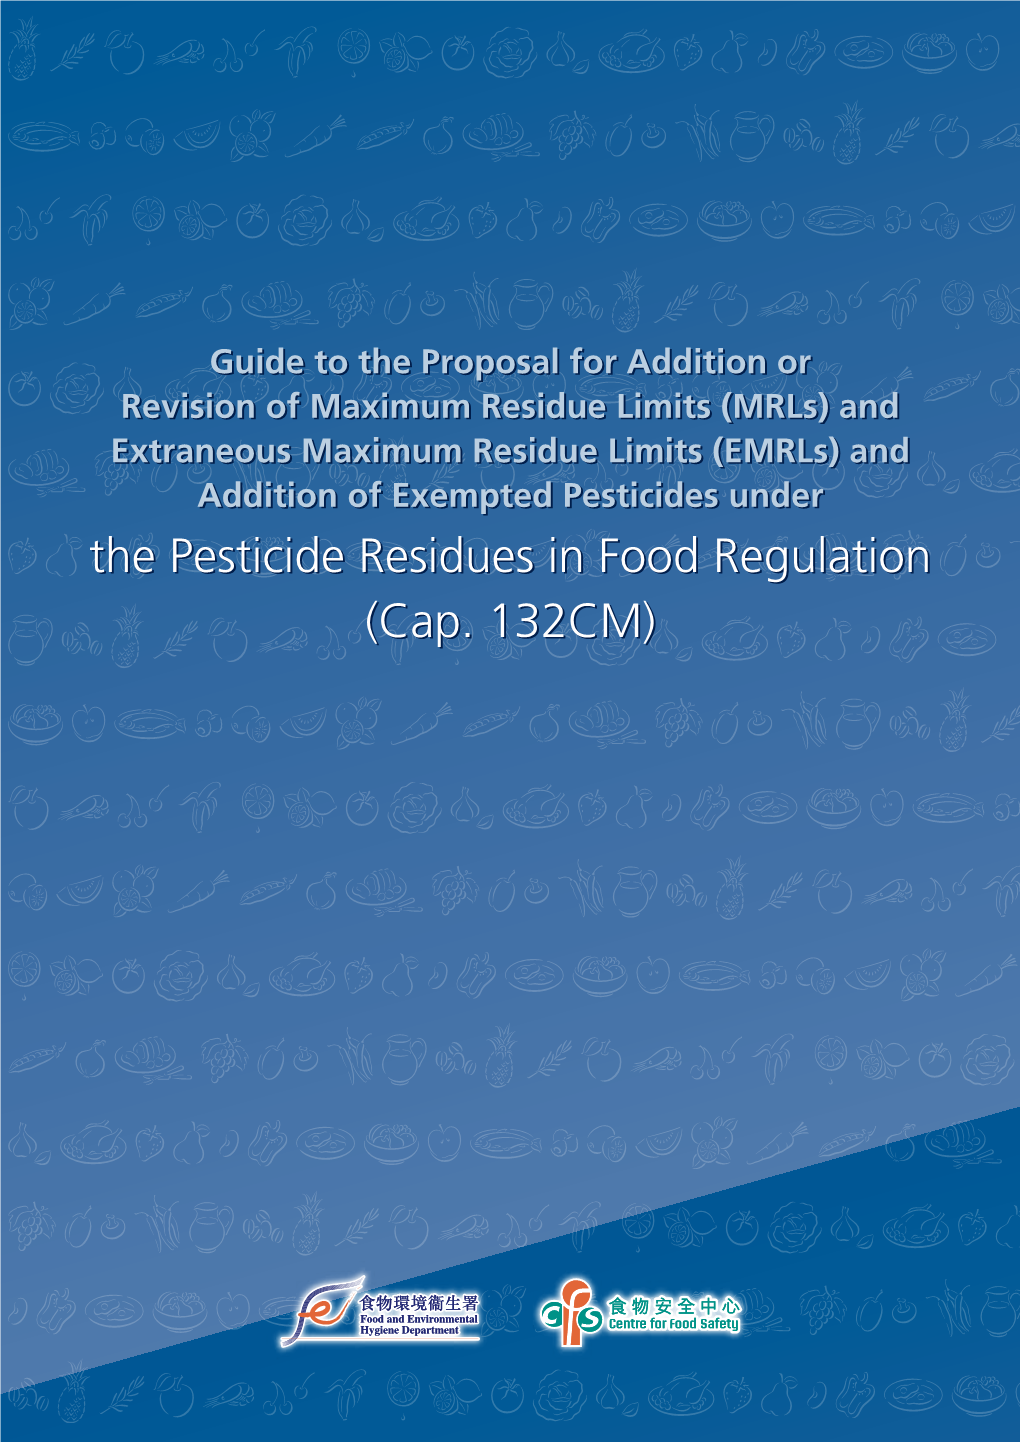 Guide to the Proposal for Addition Or Revision of Maximum Residue Limits